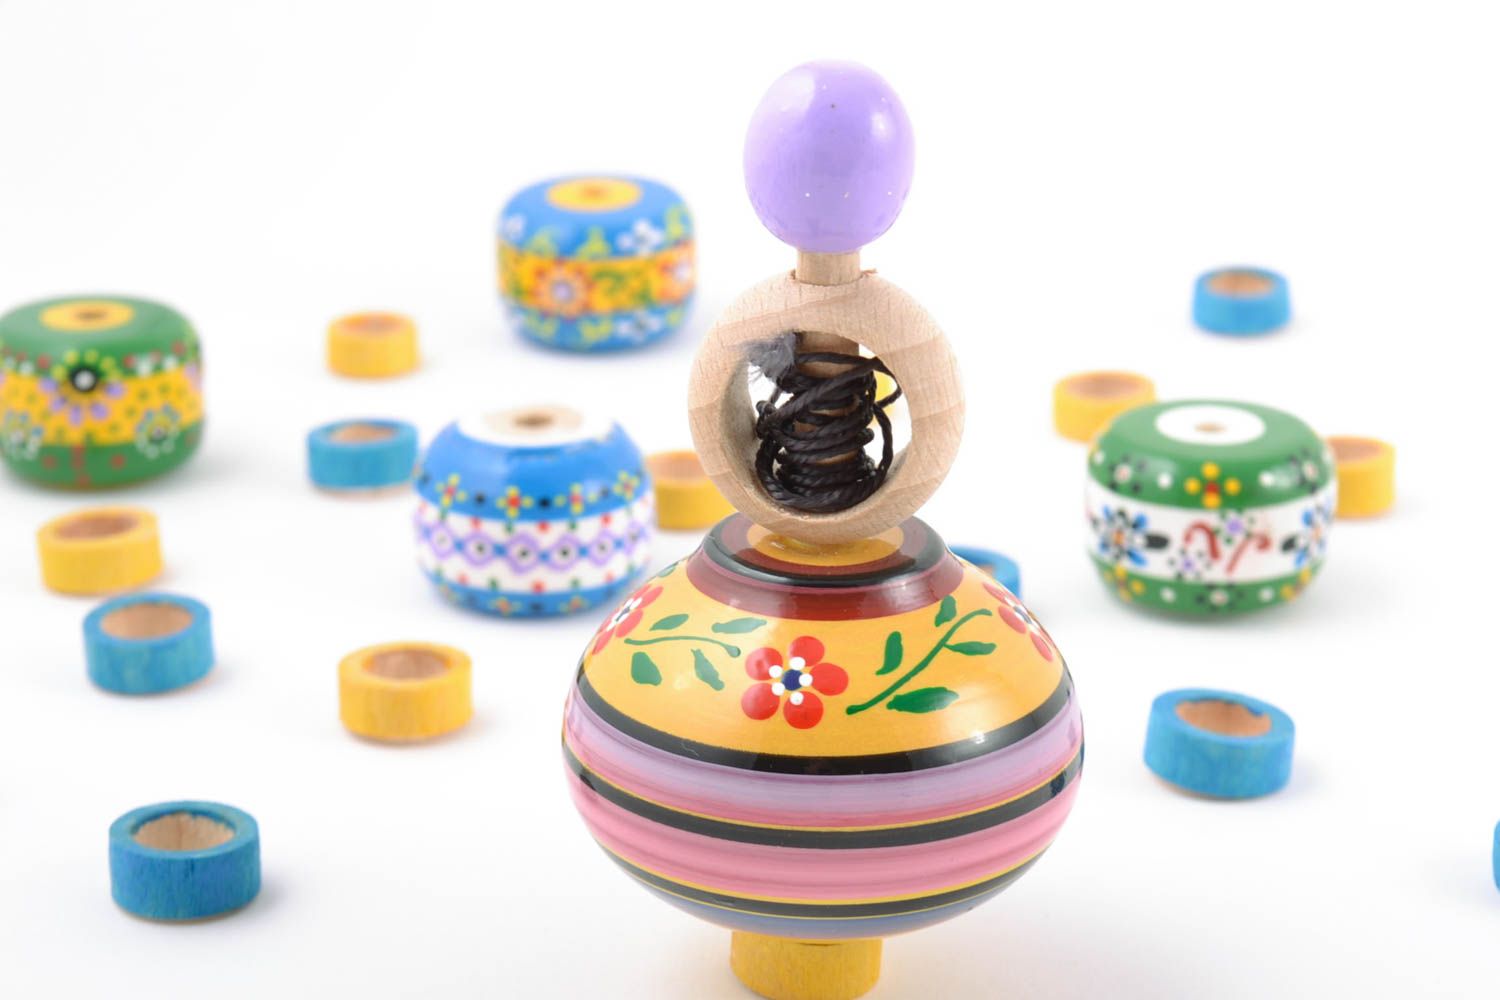 Children's handmade painted wooden spinning top educational toy photo 1